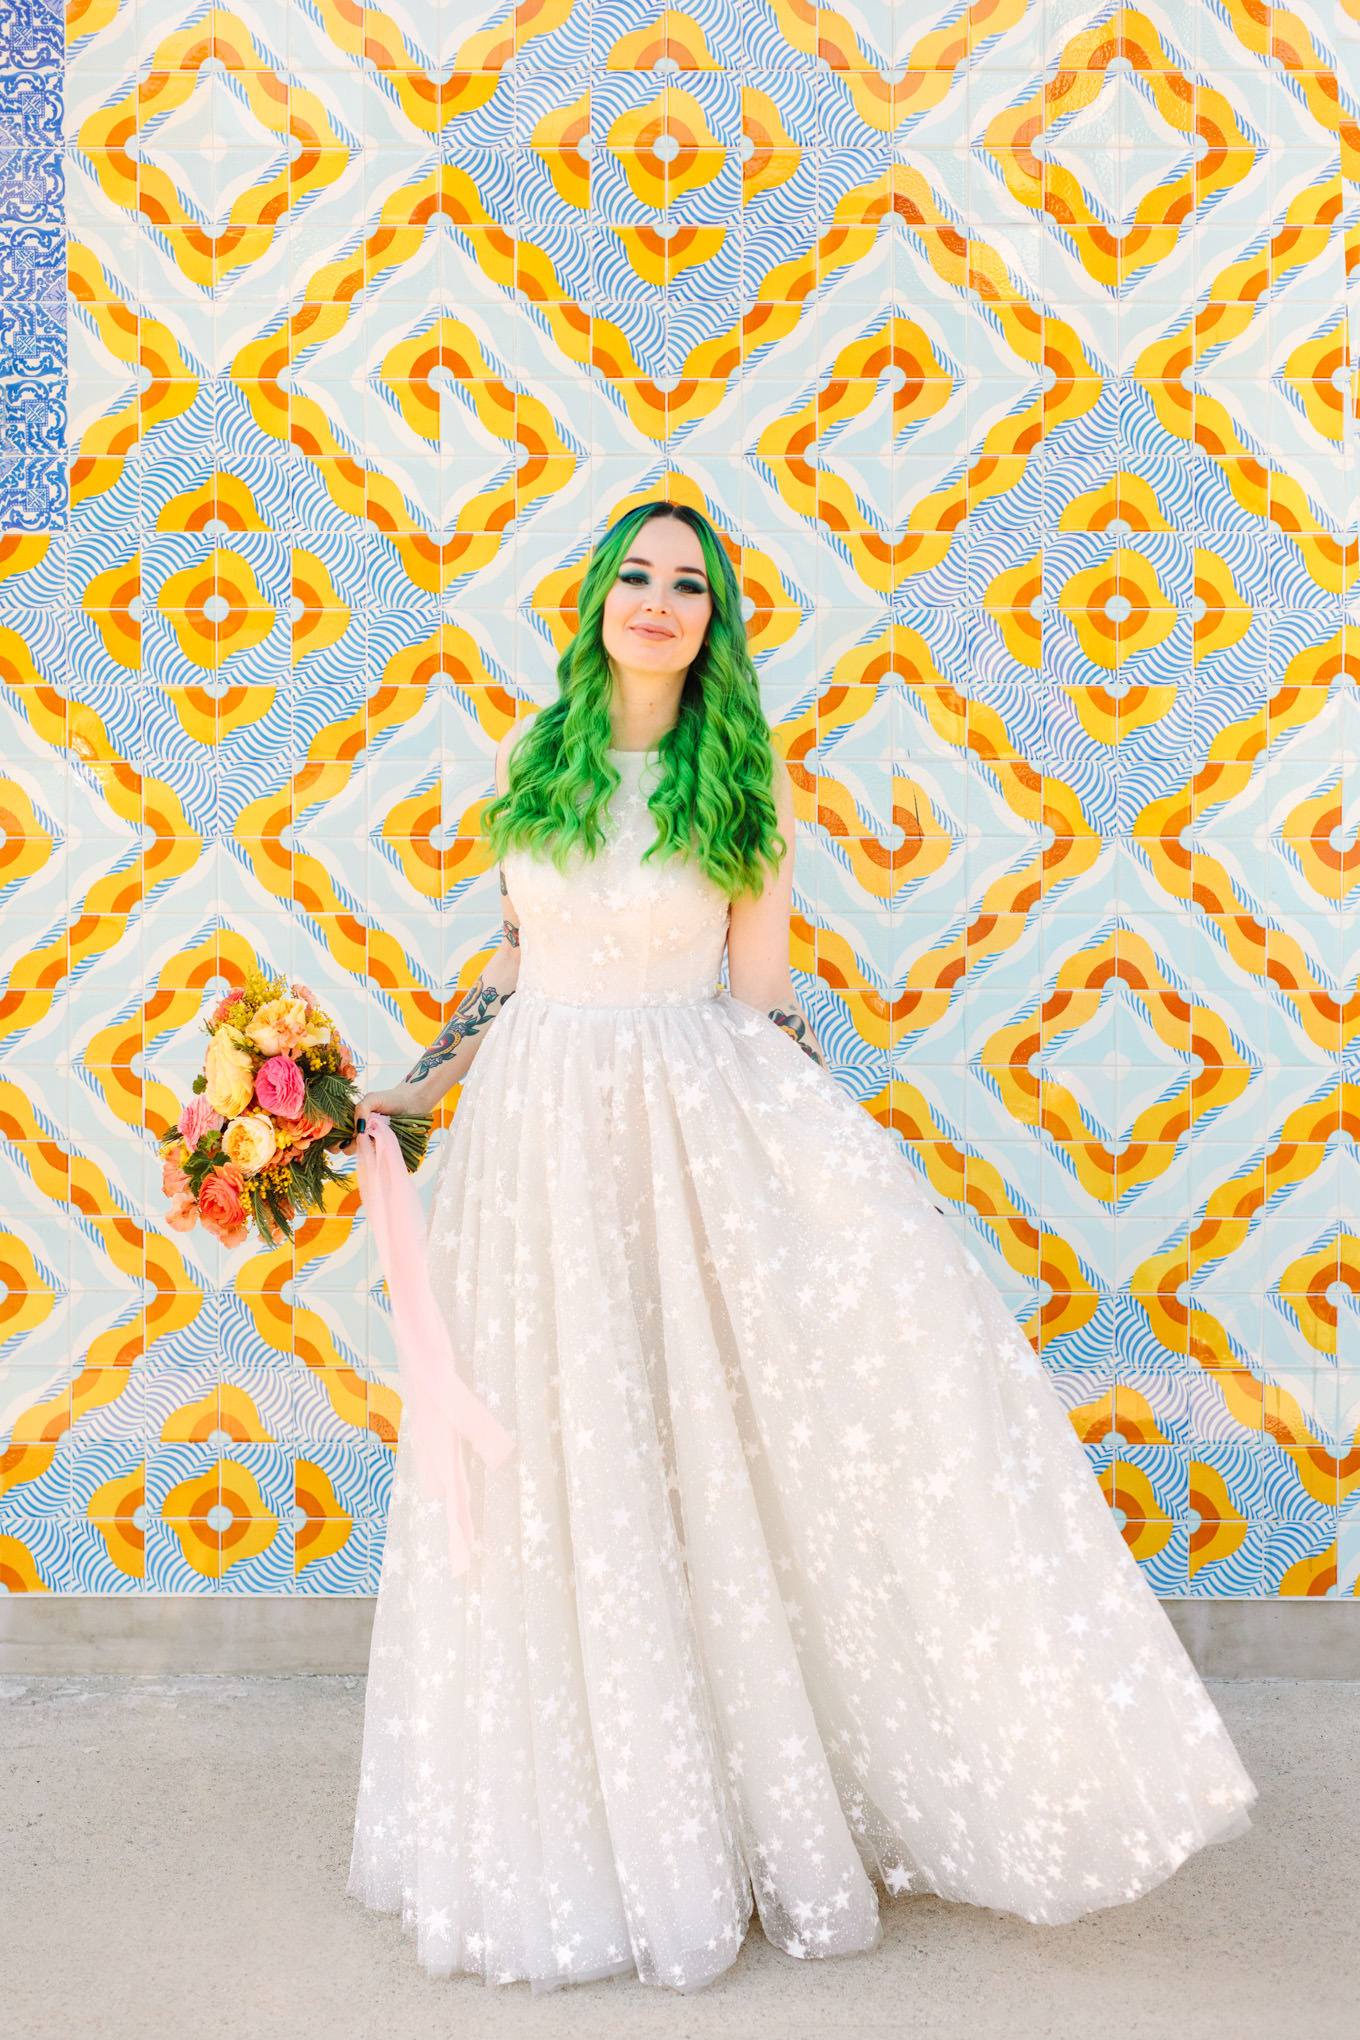 Bride with green hair wearing star Galia Lahav gown | Colorful wedding at The Unique Space Los Angeles published in The Knot Magazine | Fresh and colorful photography for fun-loving couples in Southern California | #colorfulwedding #losangeleswedding #weddingphotography #uniquespace Source: Mary Costa Photography | Los Angeles